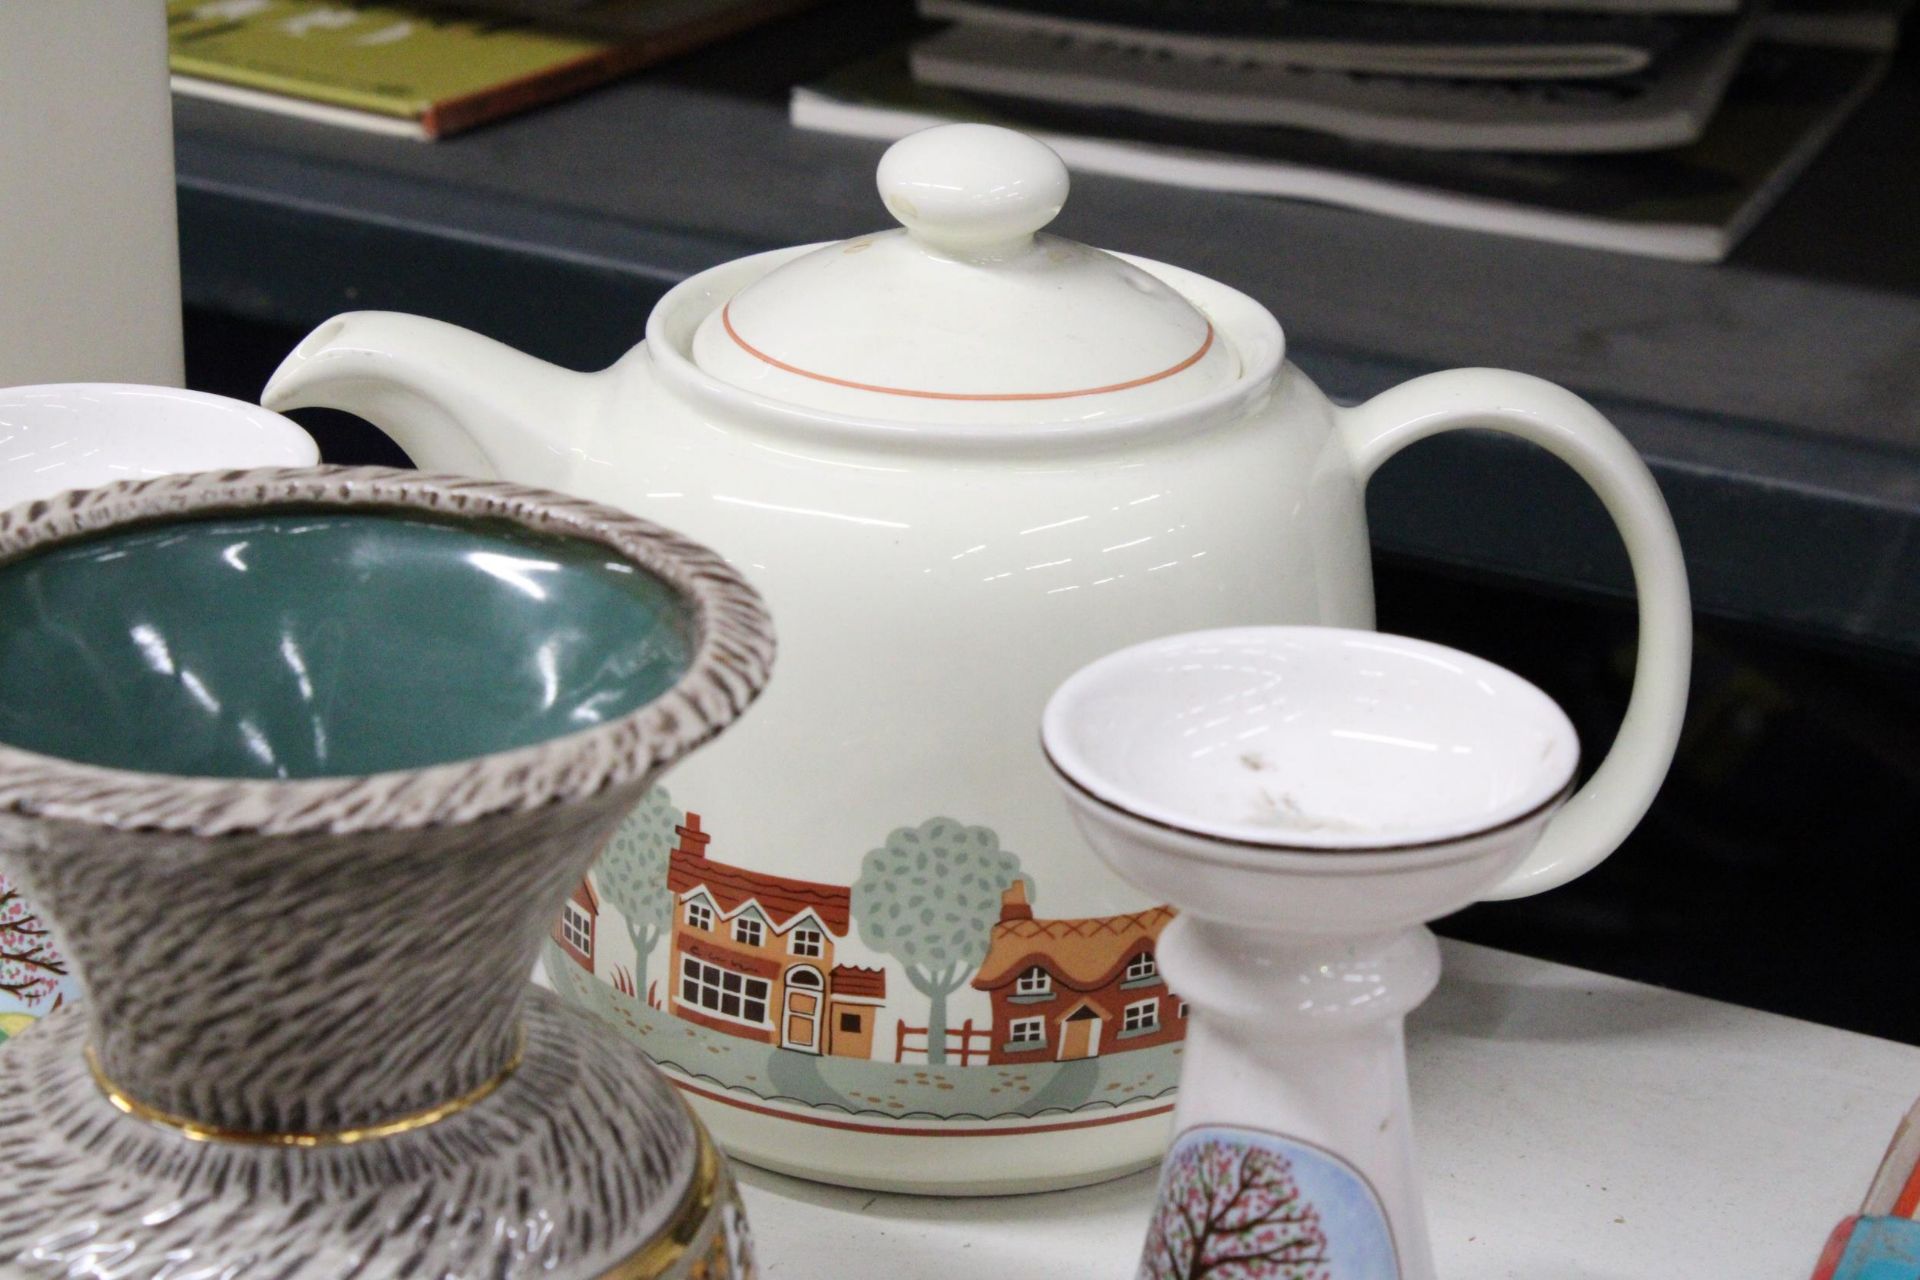 A PAIR OF VILLEROY AND BOCH CANDLESTICKS, A SADLER TEAPOT AND A STUDIO POTTERY VASE - Image 3 of 4